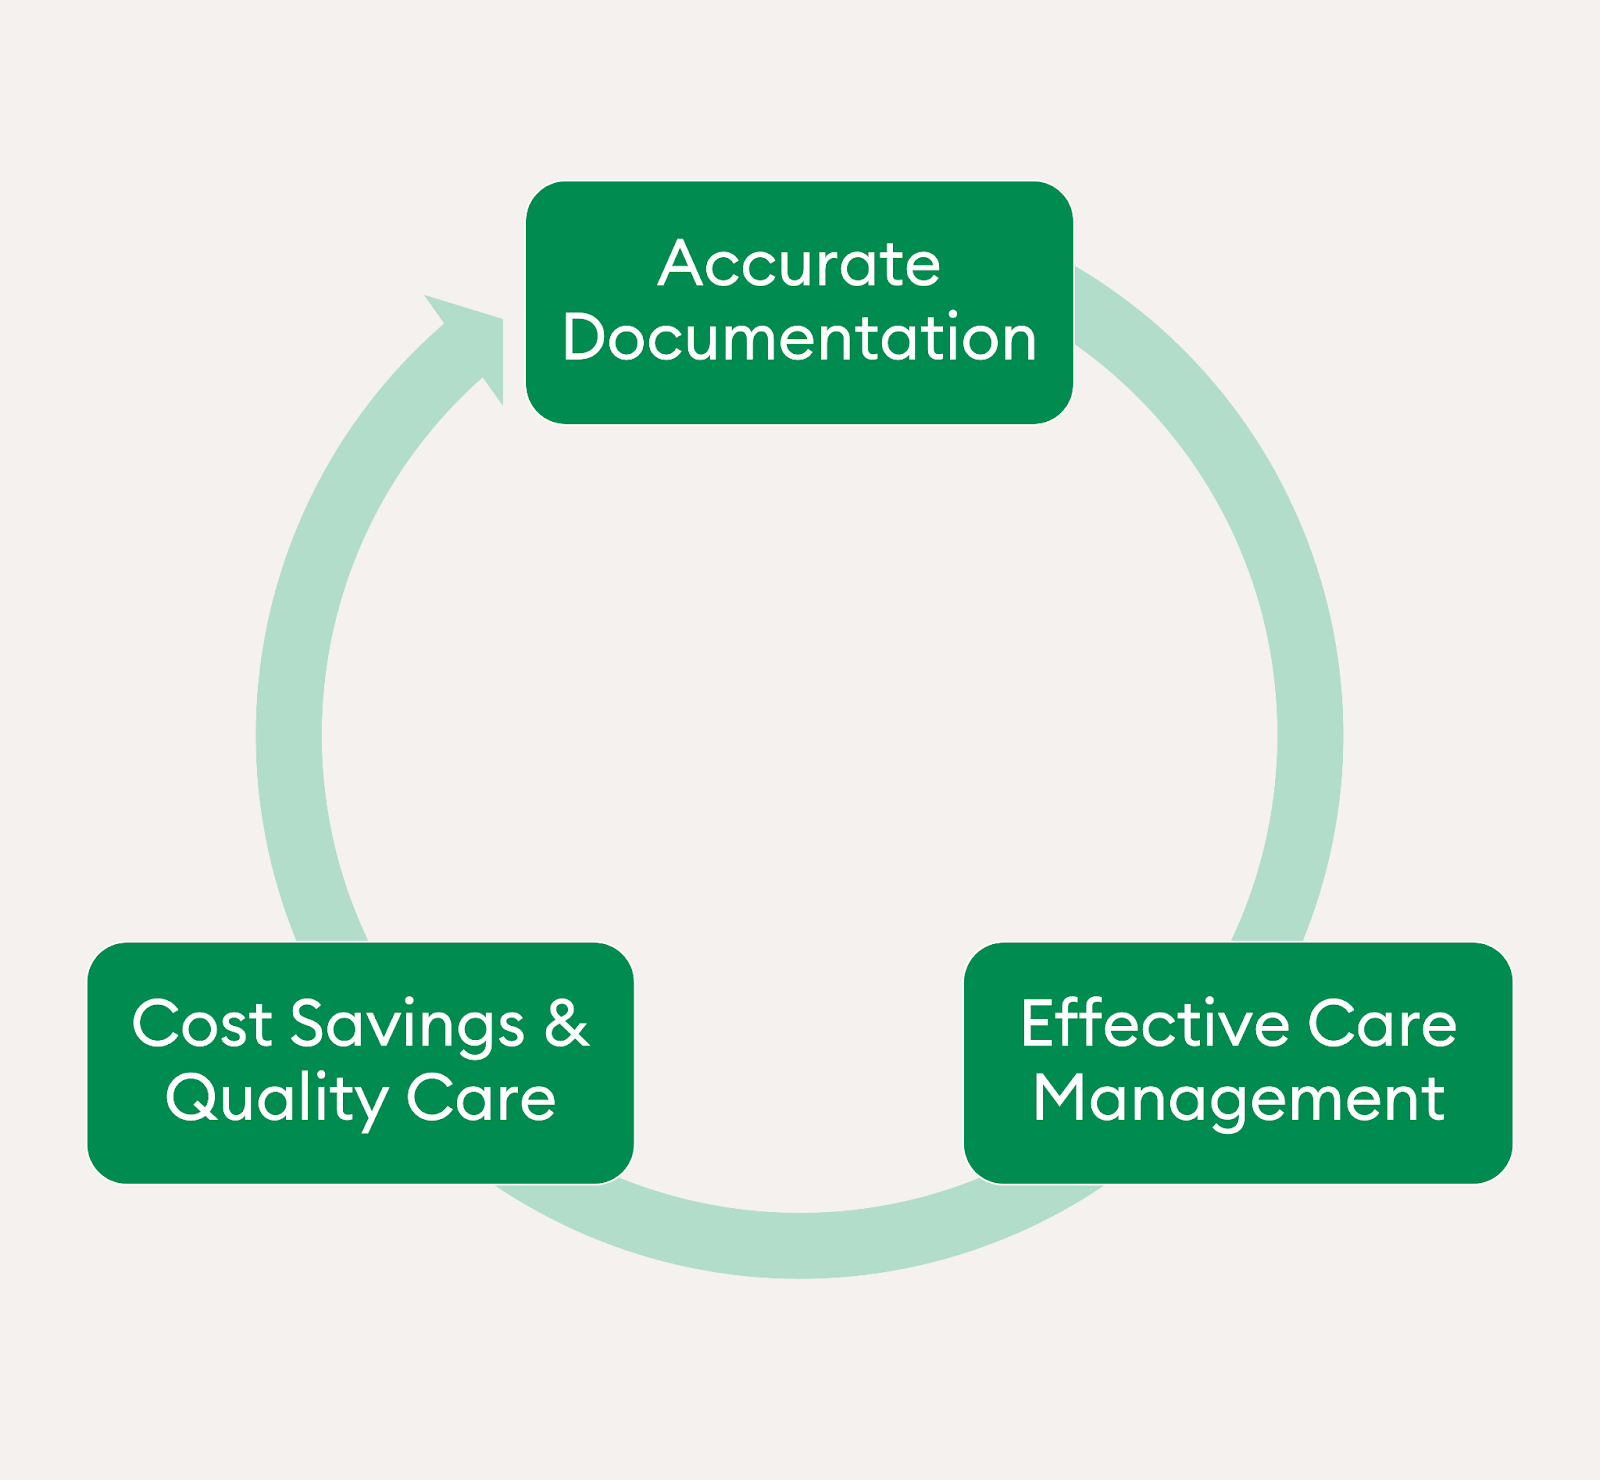 Cycle starting with accurate documentation, then effective care management, and ending with cost savings & quality care